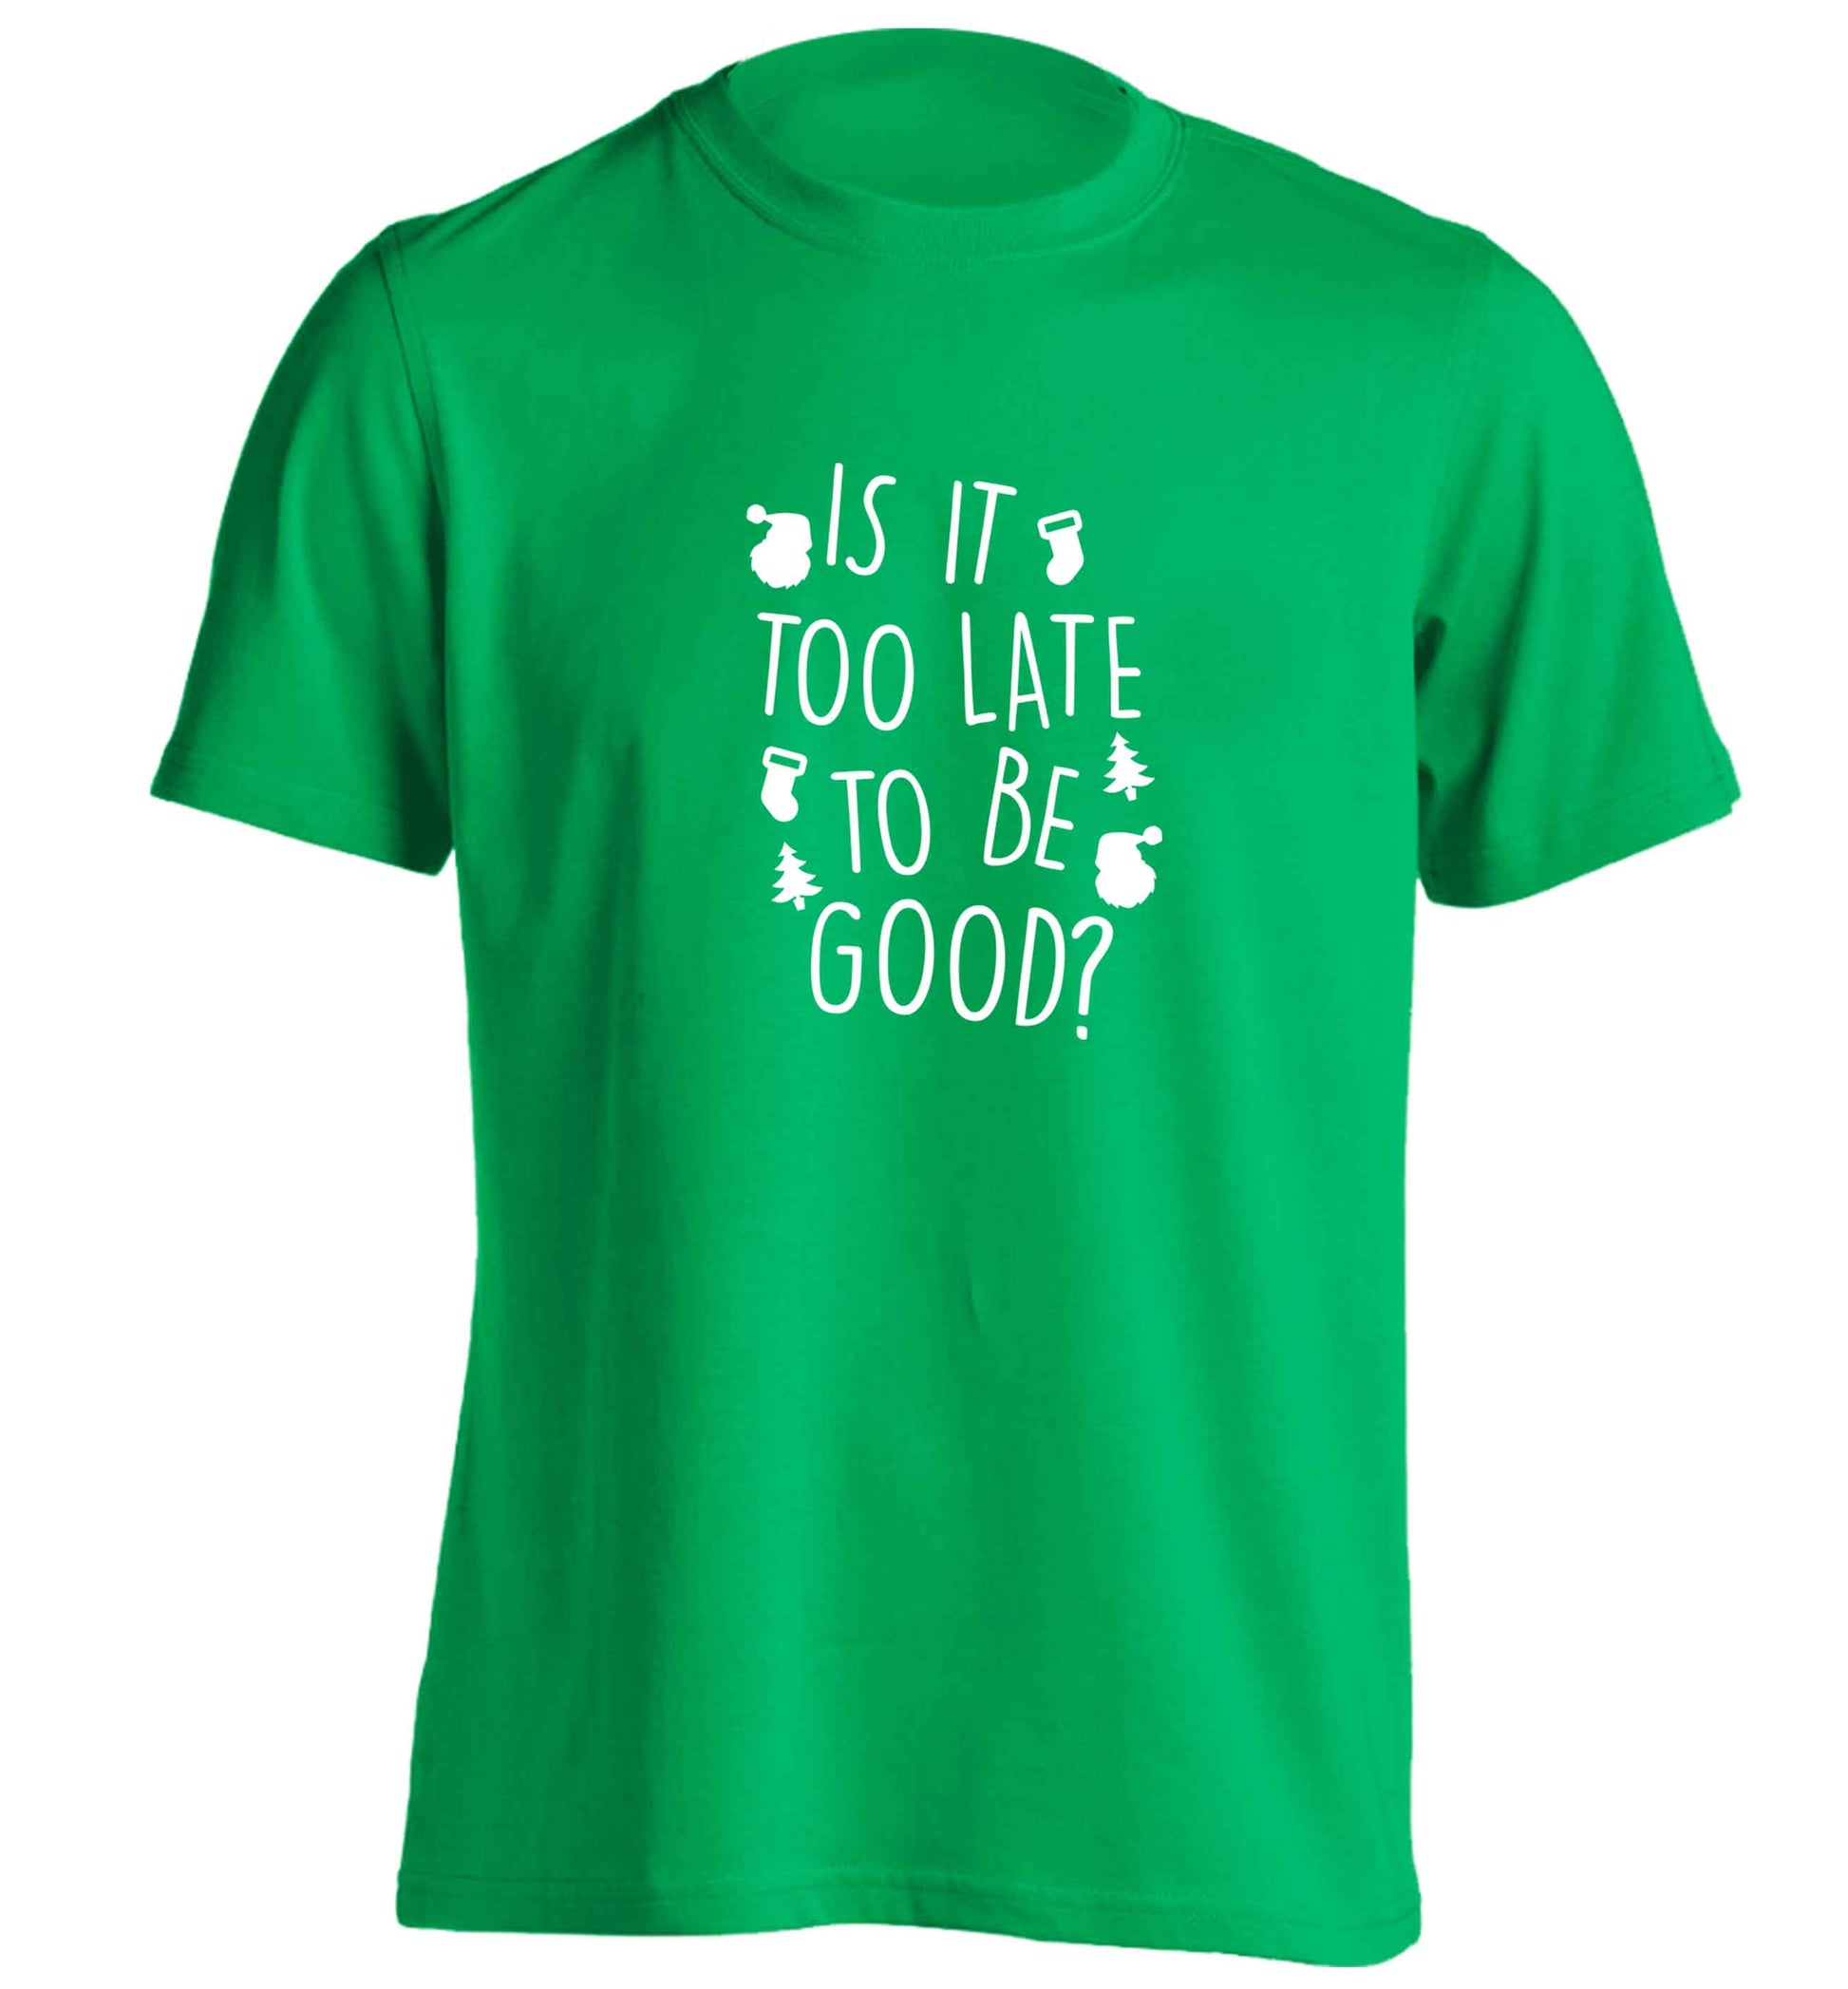 Too Late to be Good adults unisex green Tshirt 2XL